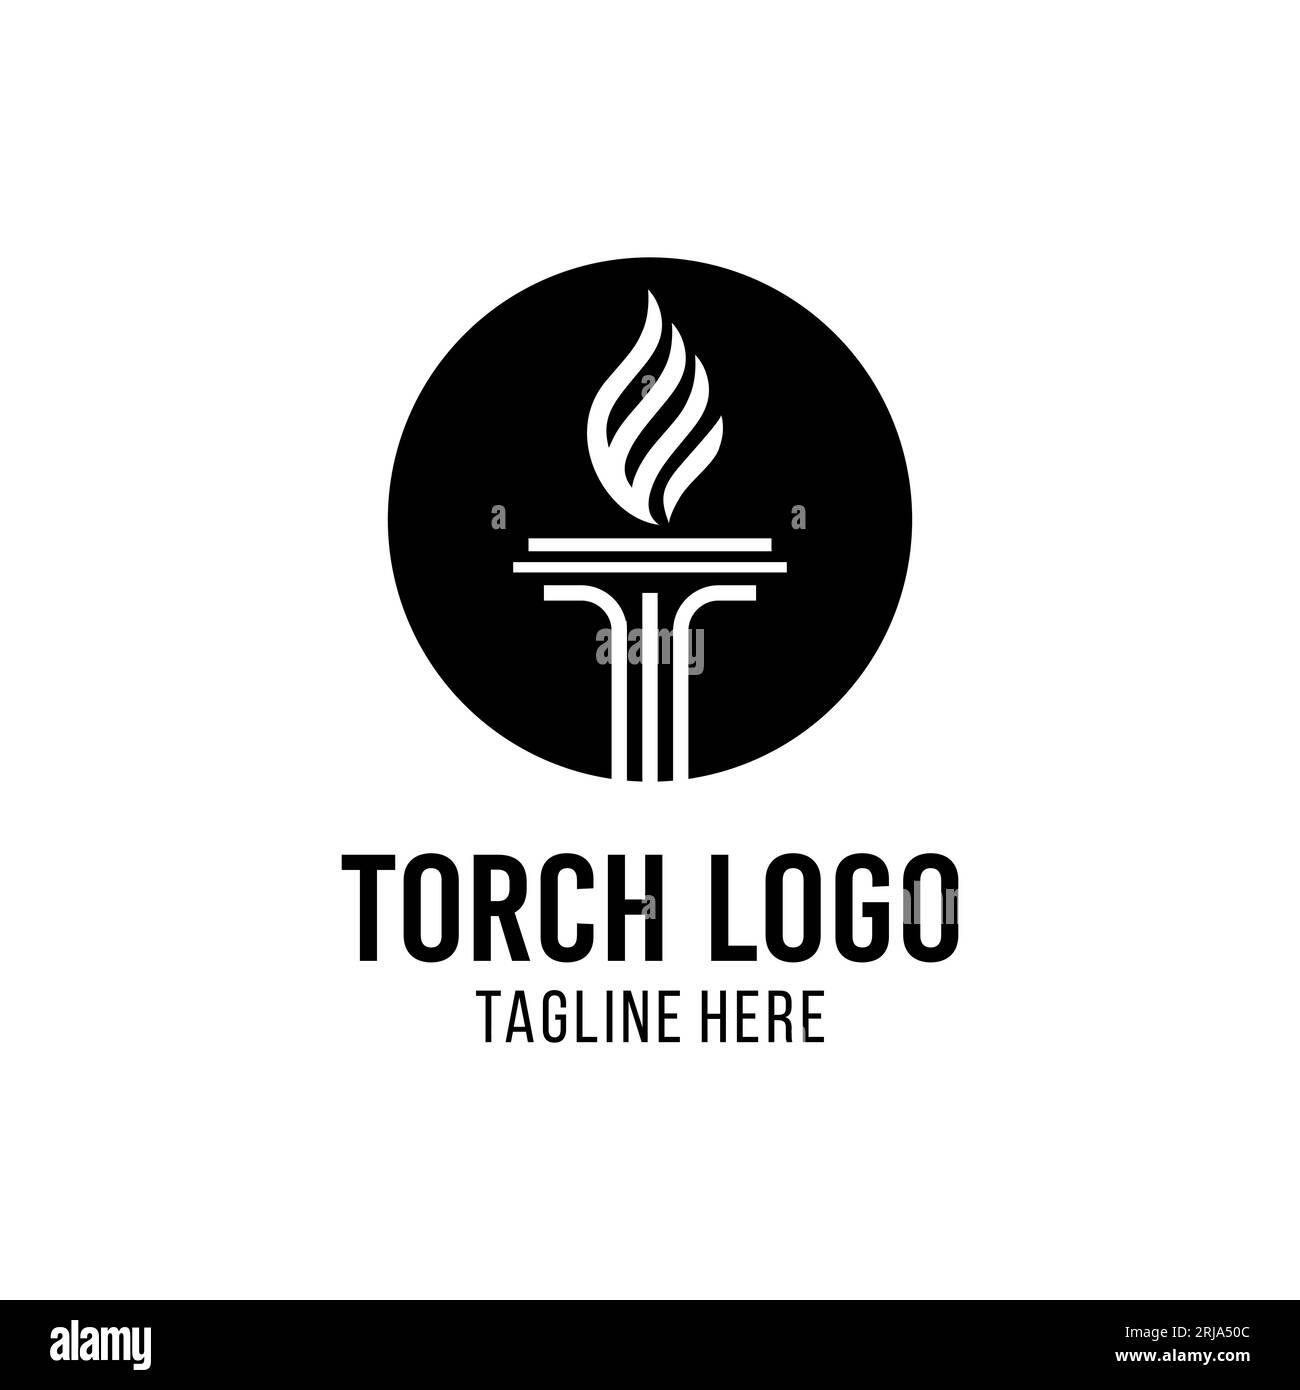 Torch Logo Design Inspiration With Law Icon and Shield Stock Vector